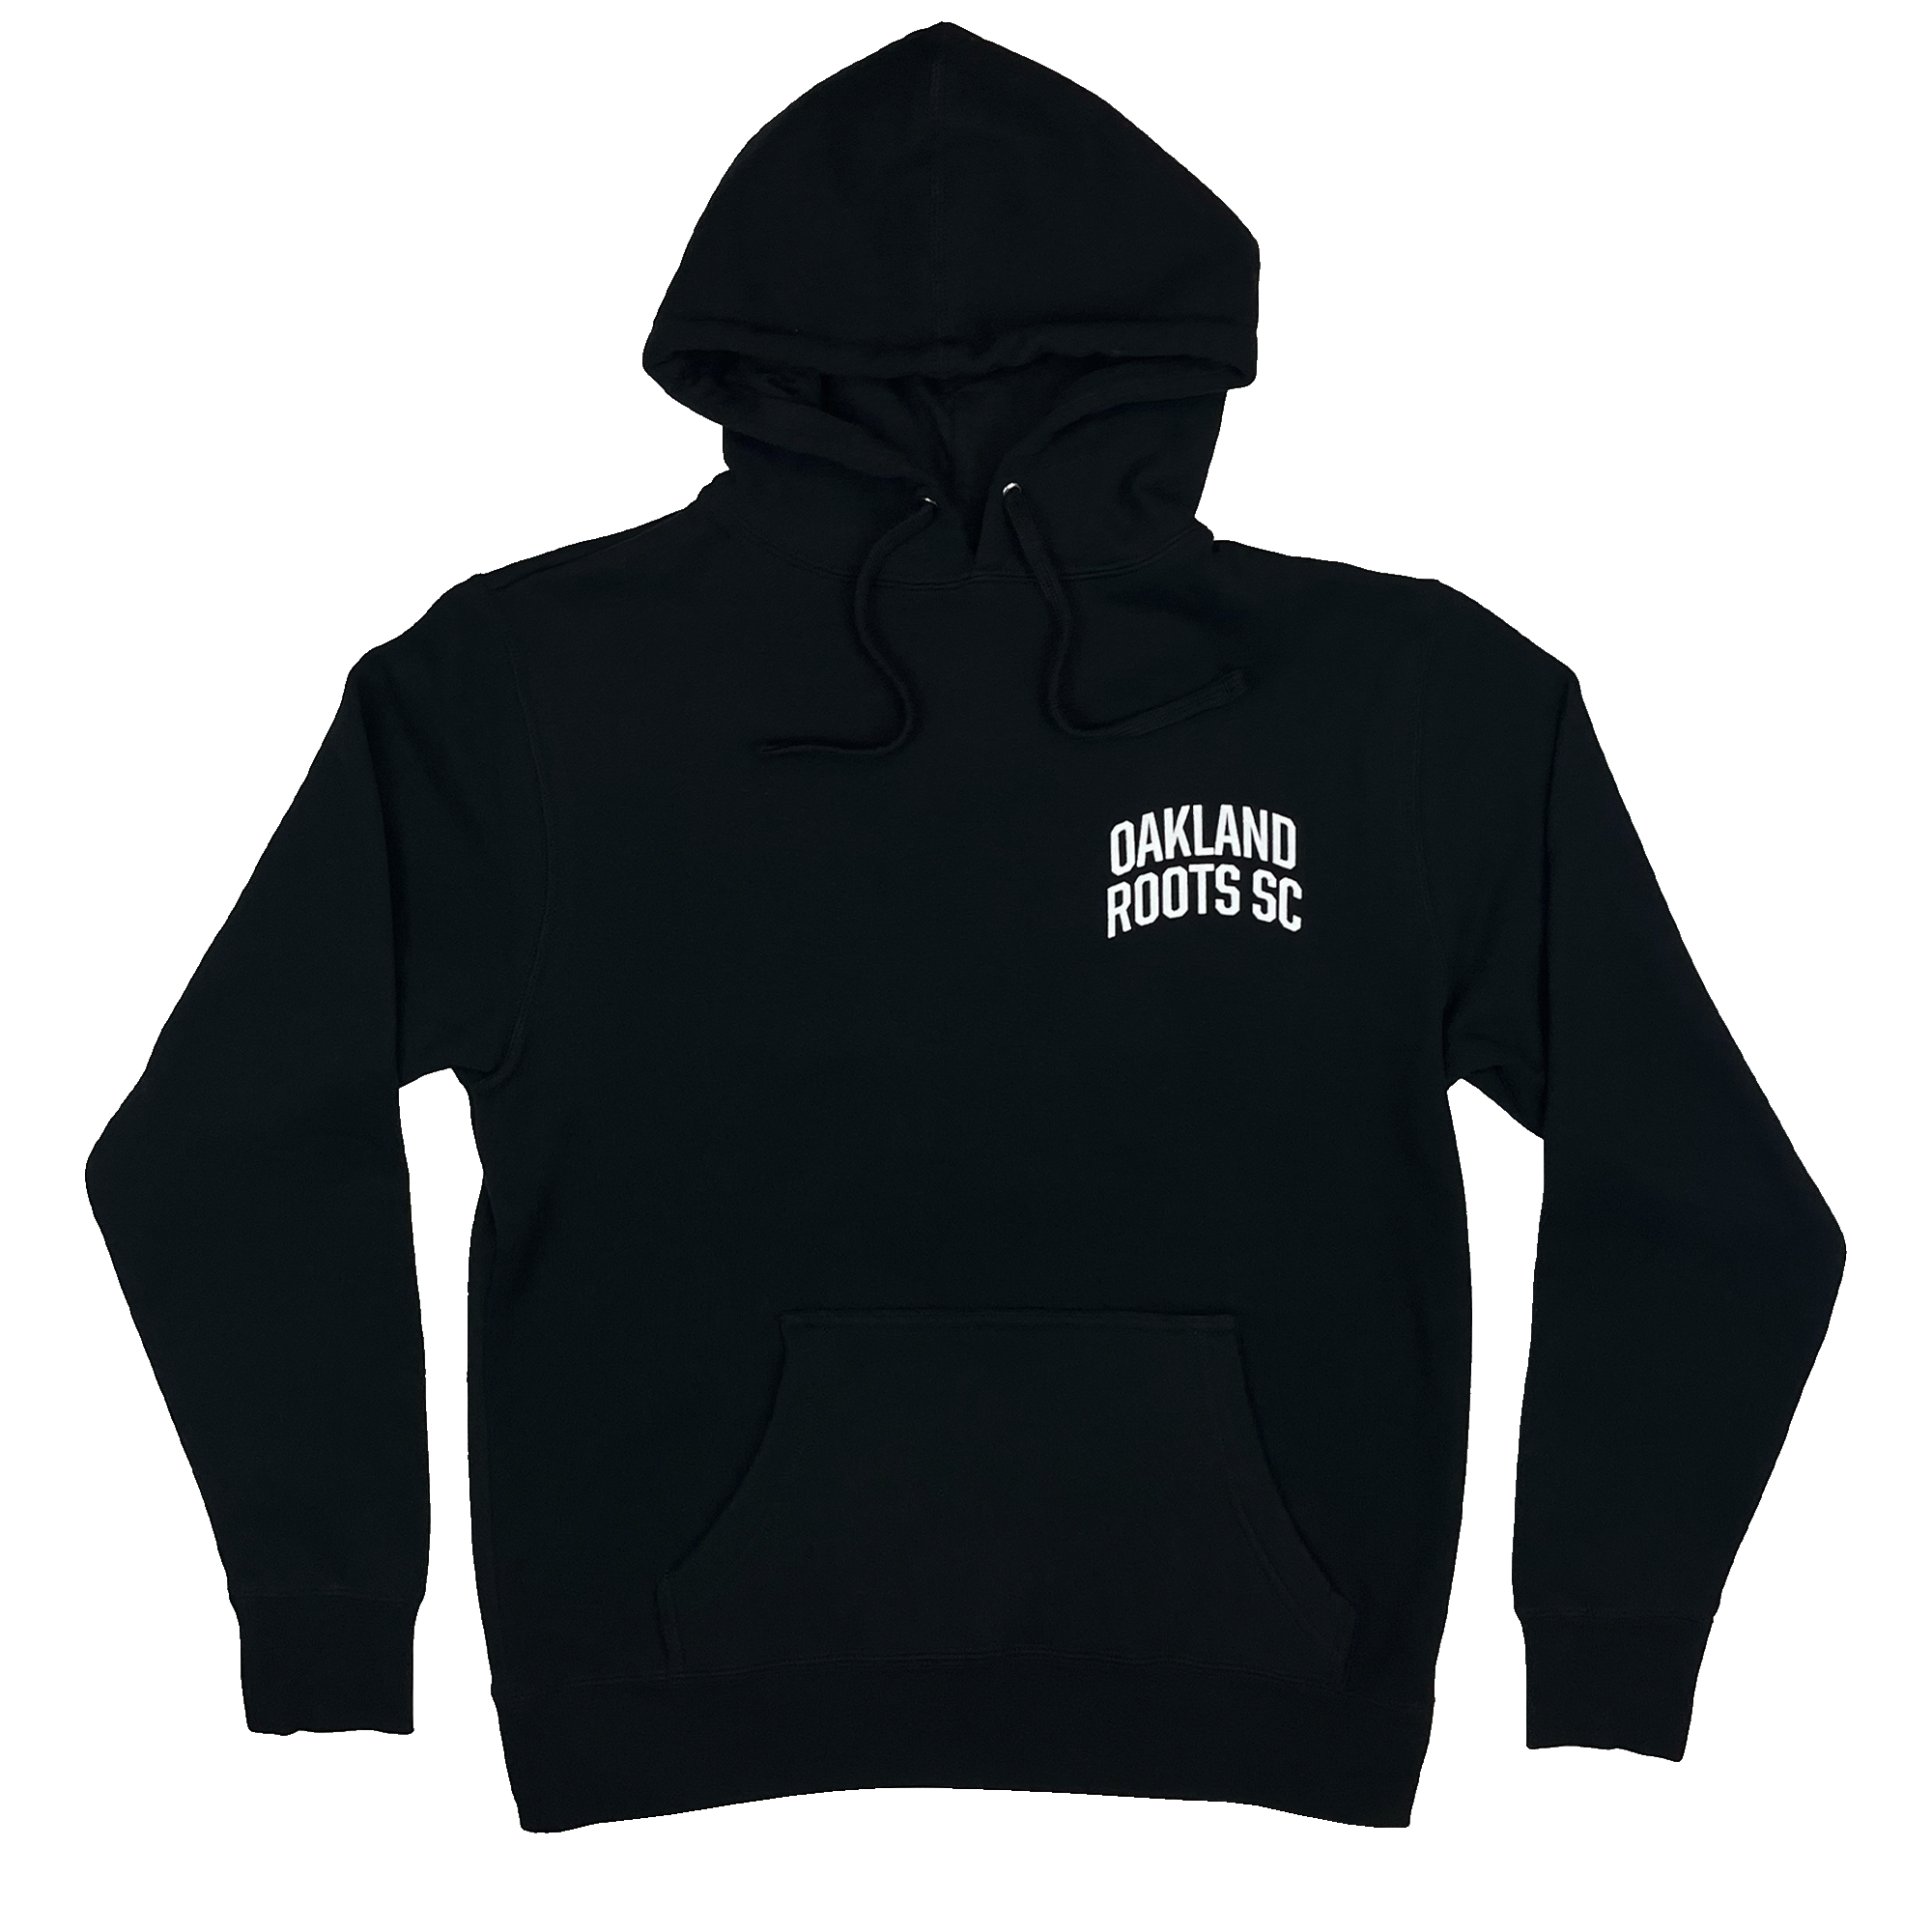 Black pullover hoodie with white OAKLAND ROOTS SC wordmark on the chest.